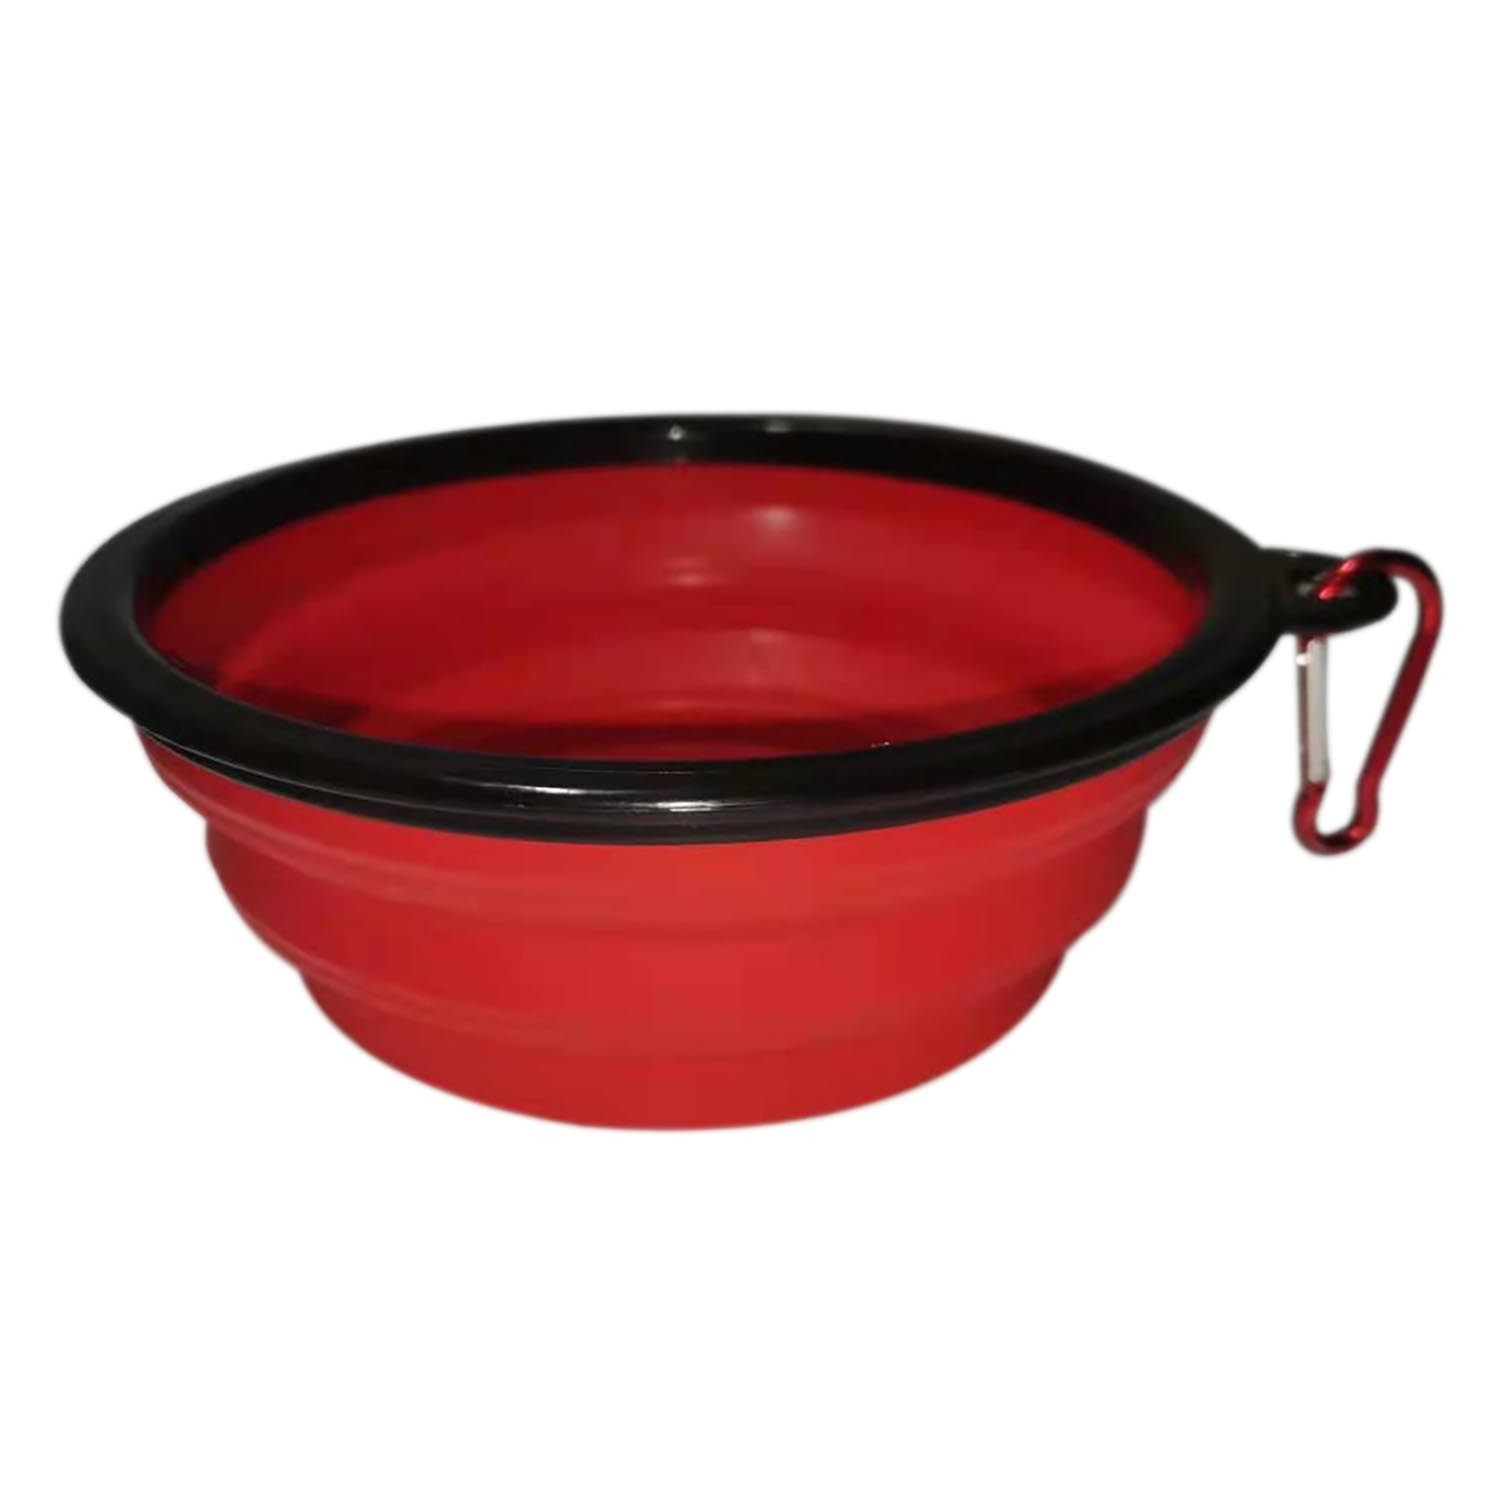 Collapsible Travel Bowl Image 1